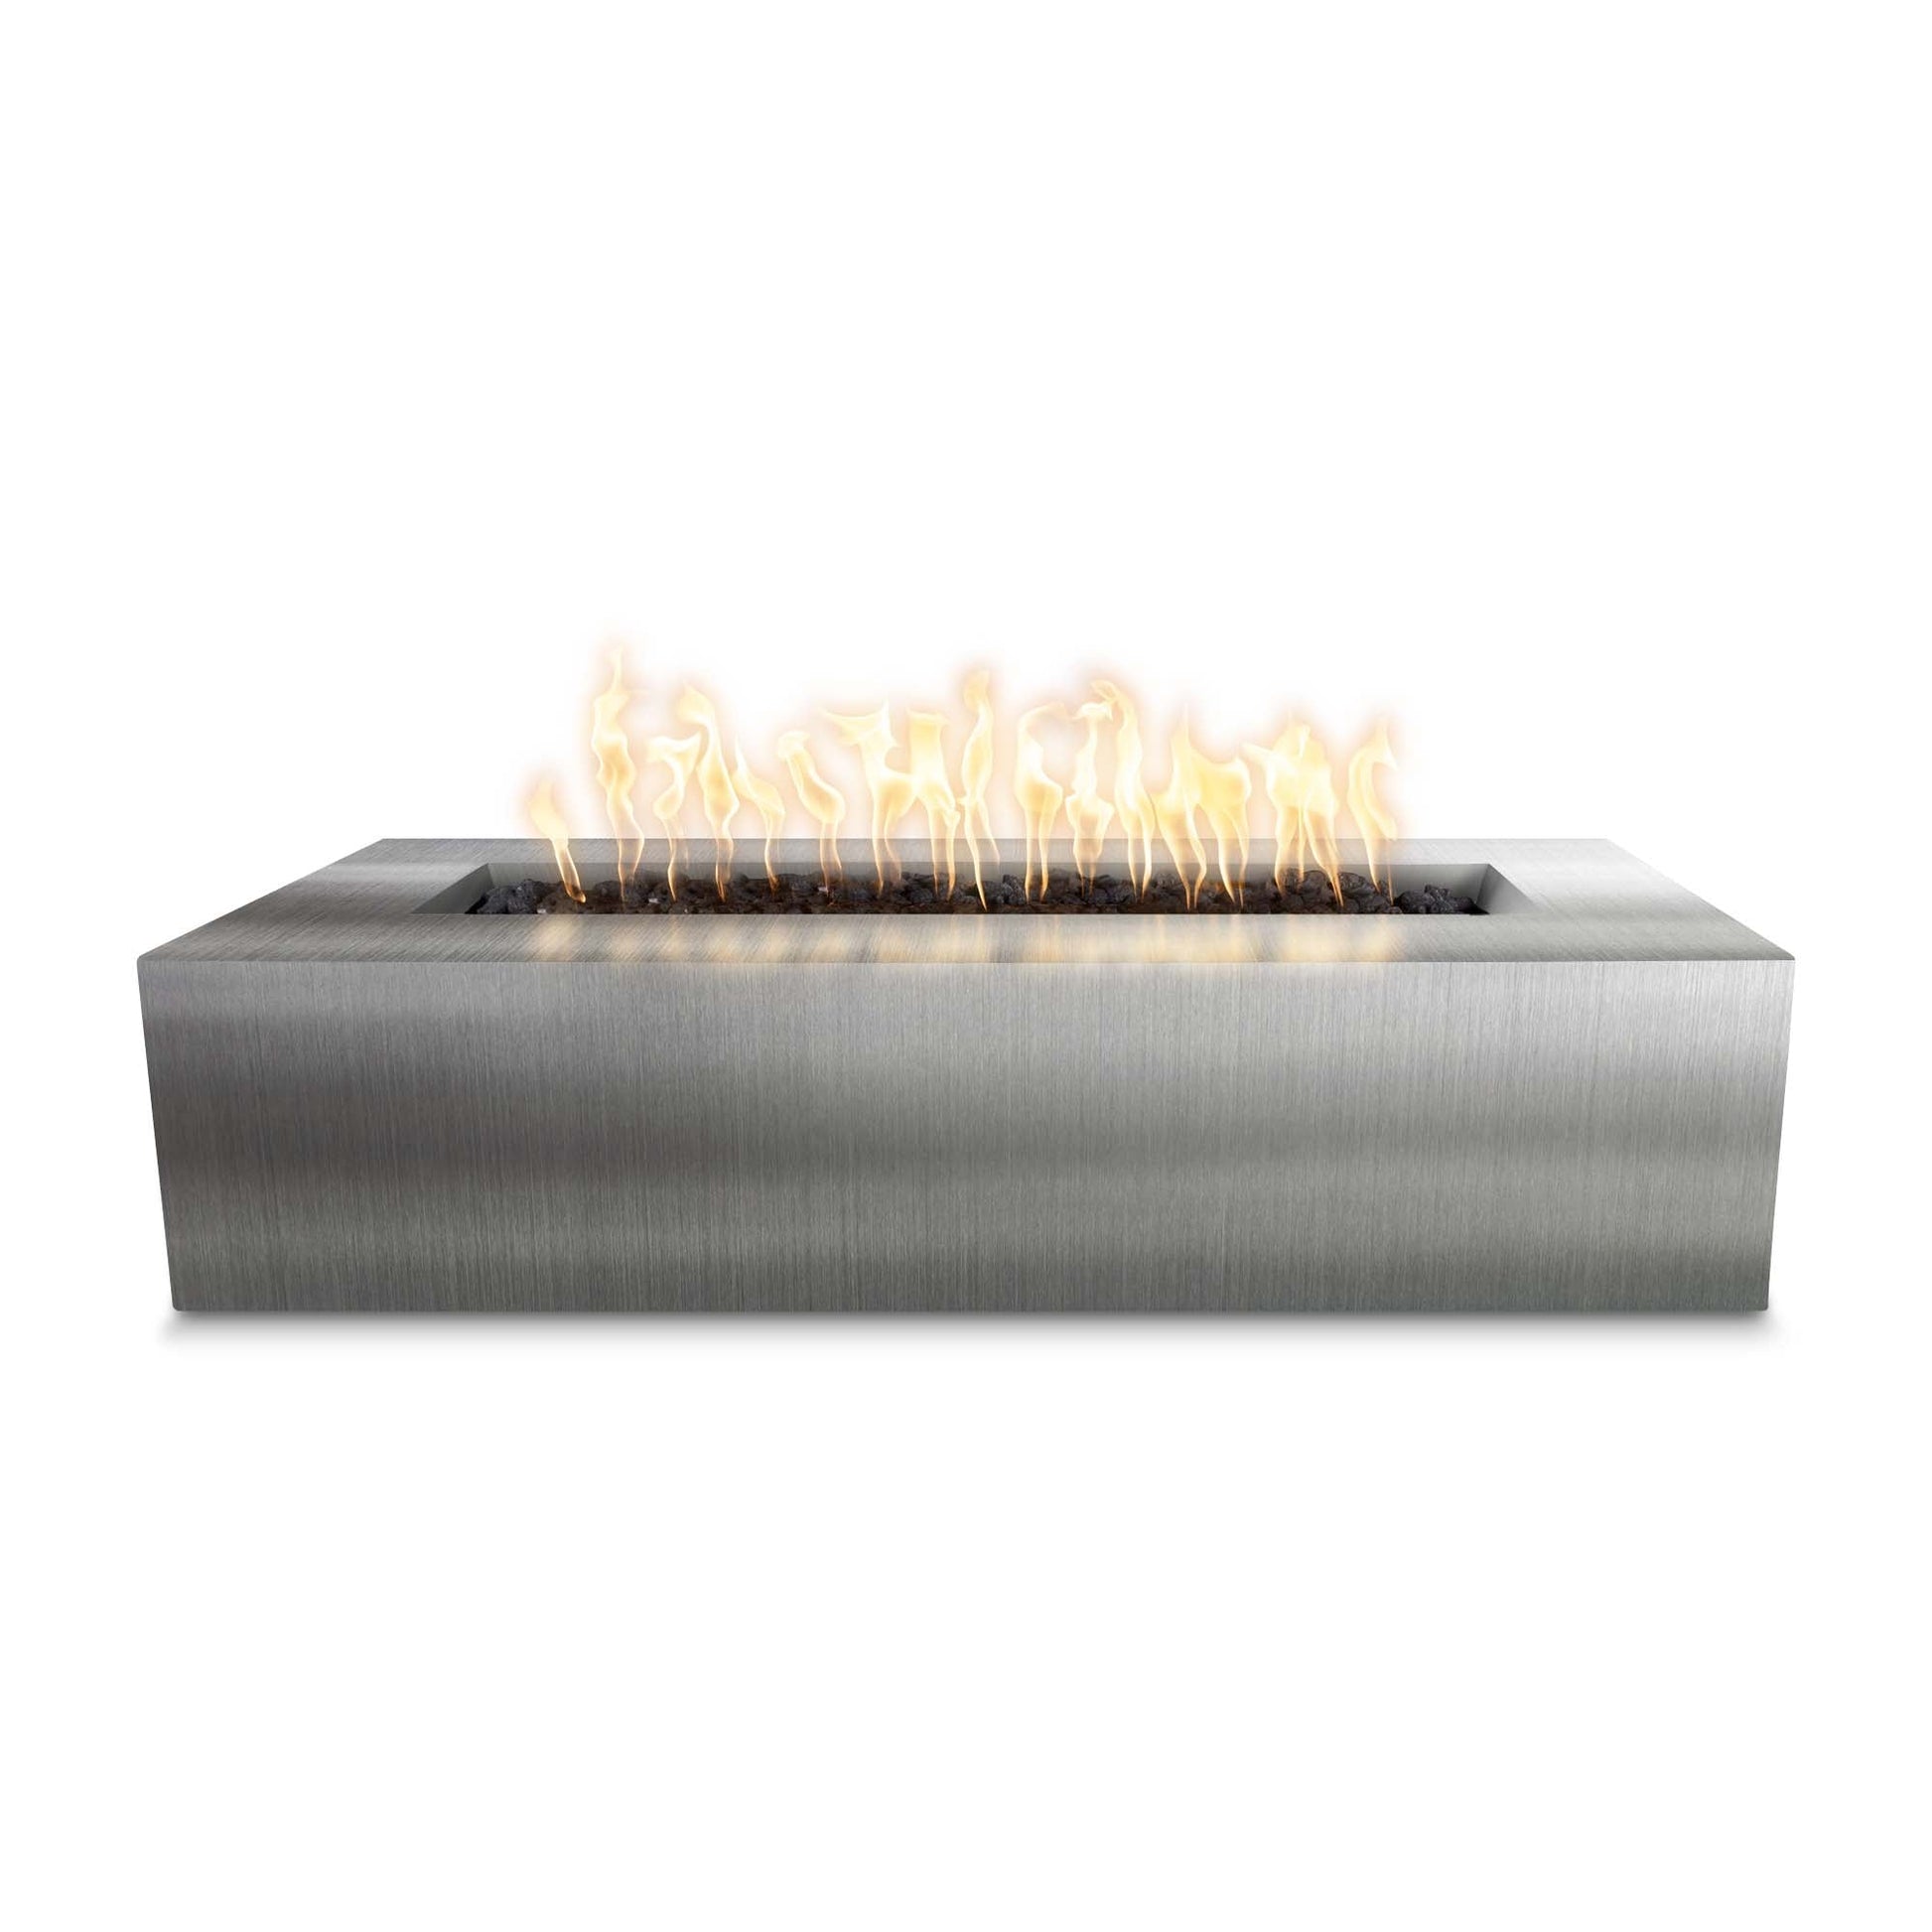 The Outdoor Plus Rectangular Regal 48" Stainless Steel Natural Gas Fire Pit with 110V Electronic Ignition